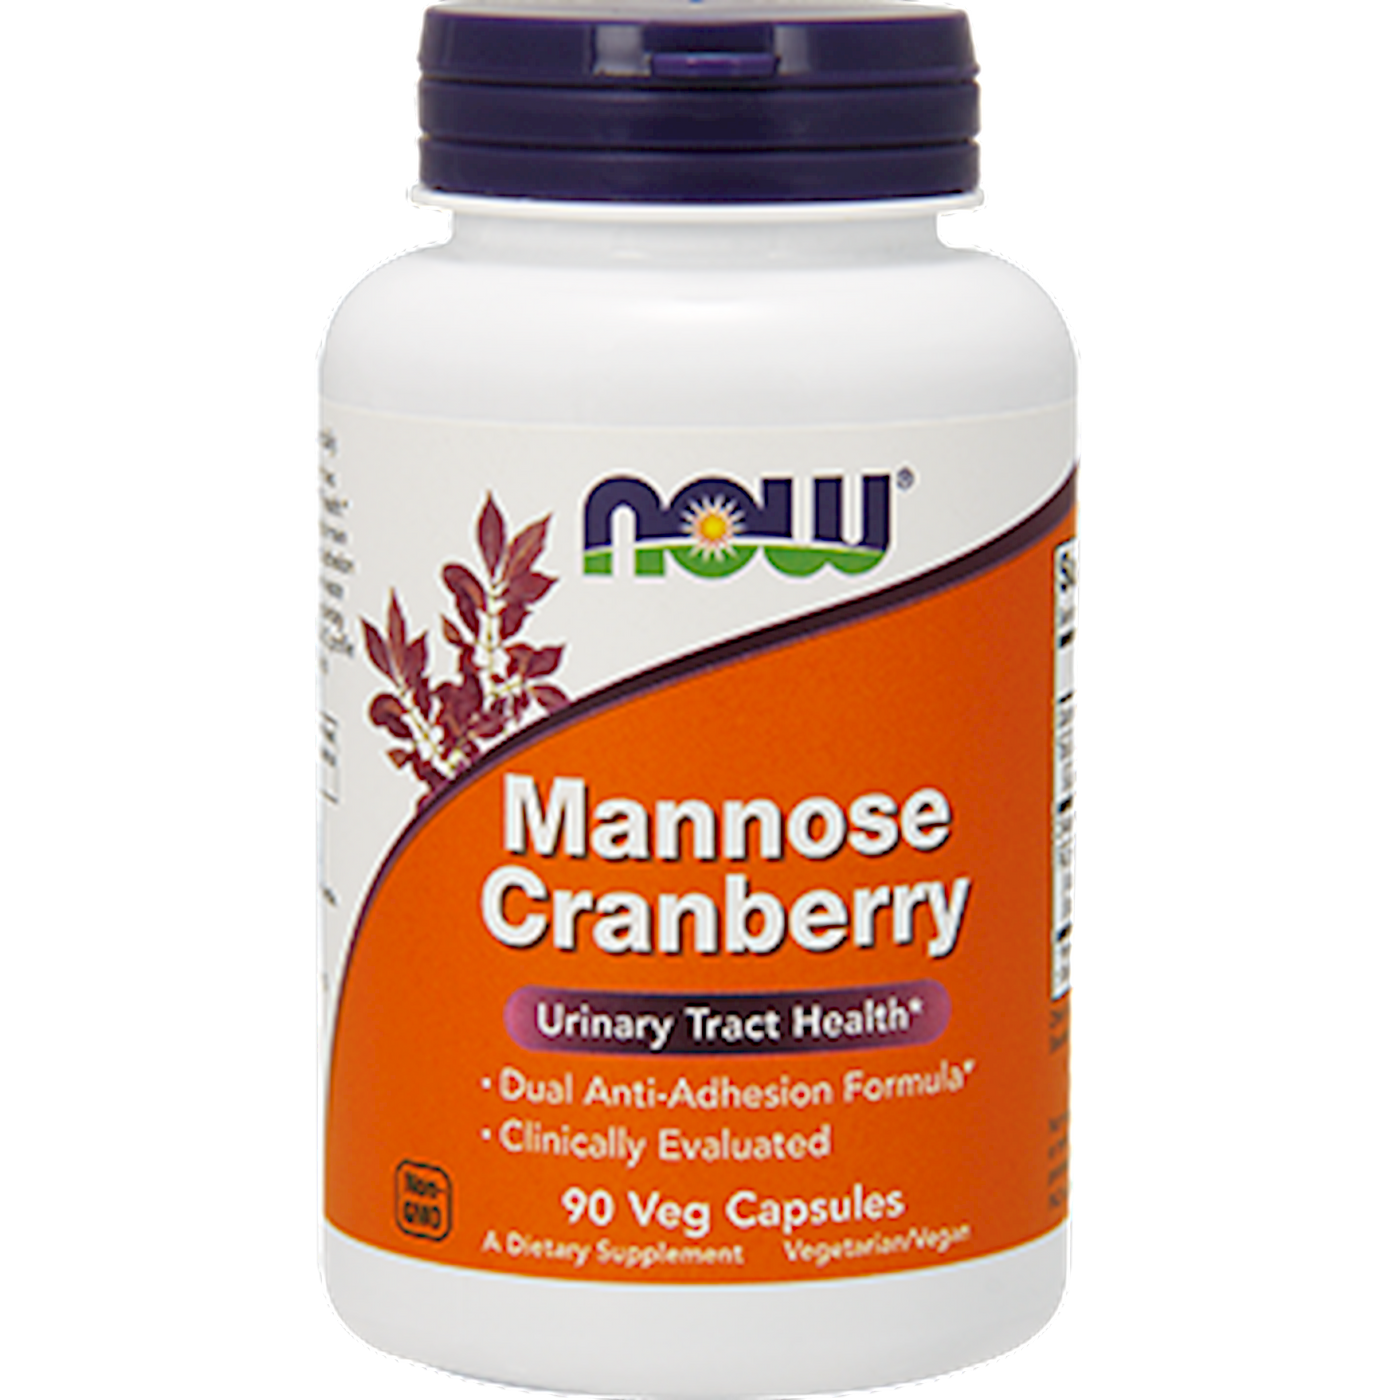 Mannose Cranberry  Curated Wellness